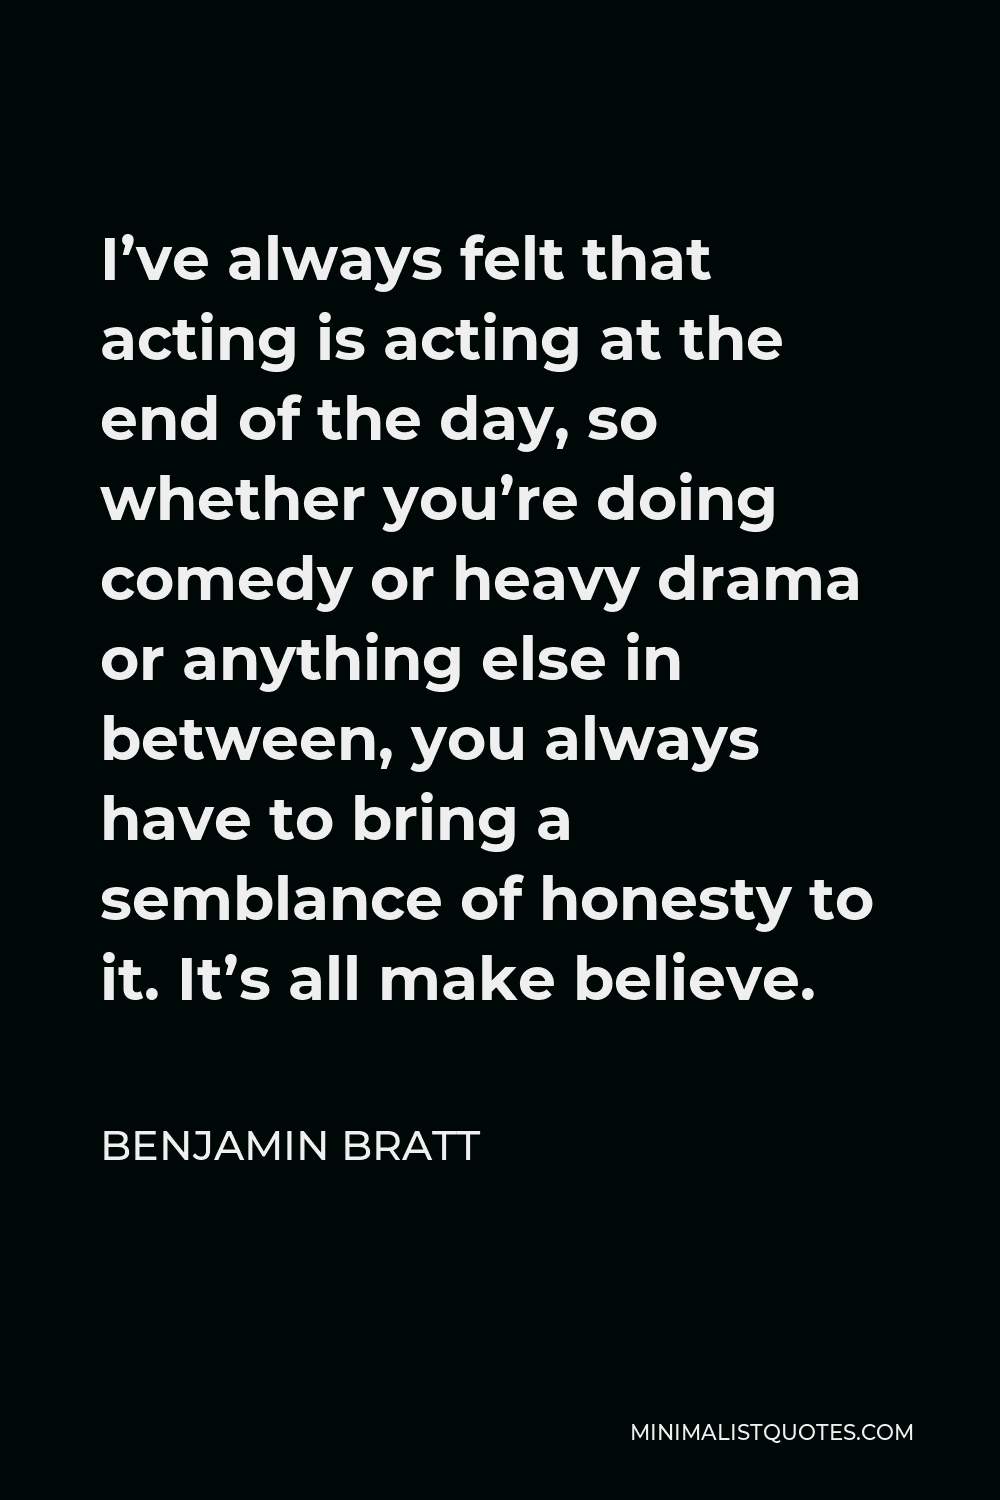 Benjamin Bratt Quote - I’ve always felt that acting is acting at the end of the day, so whether you’re doing comedy or heavy drama or anything else in between, you always have to bring a semblance of honesty to it. It’s all make believe.